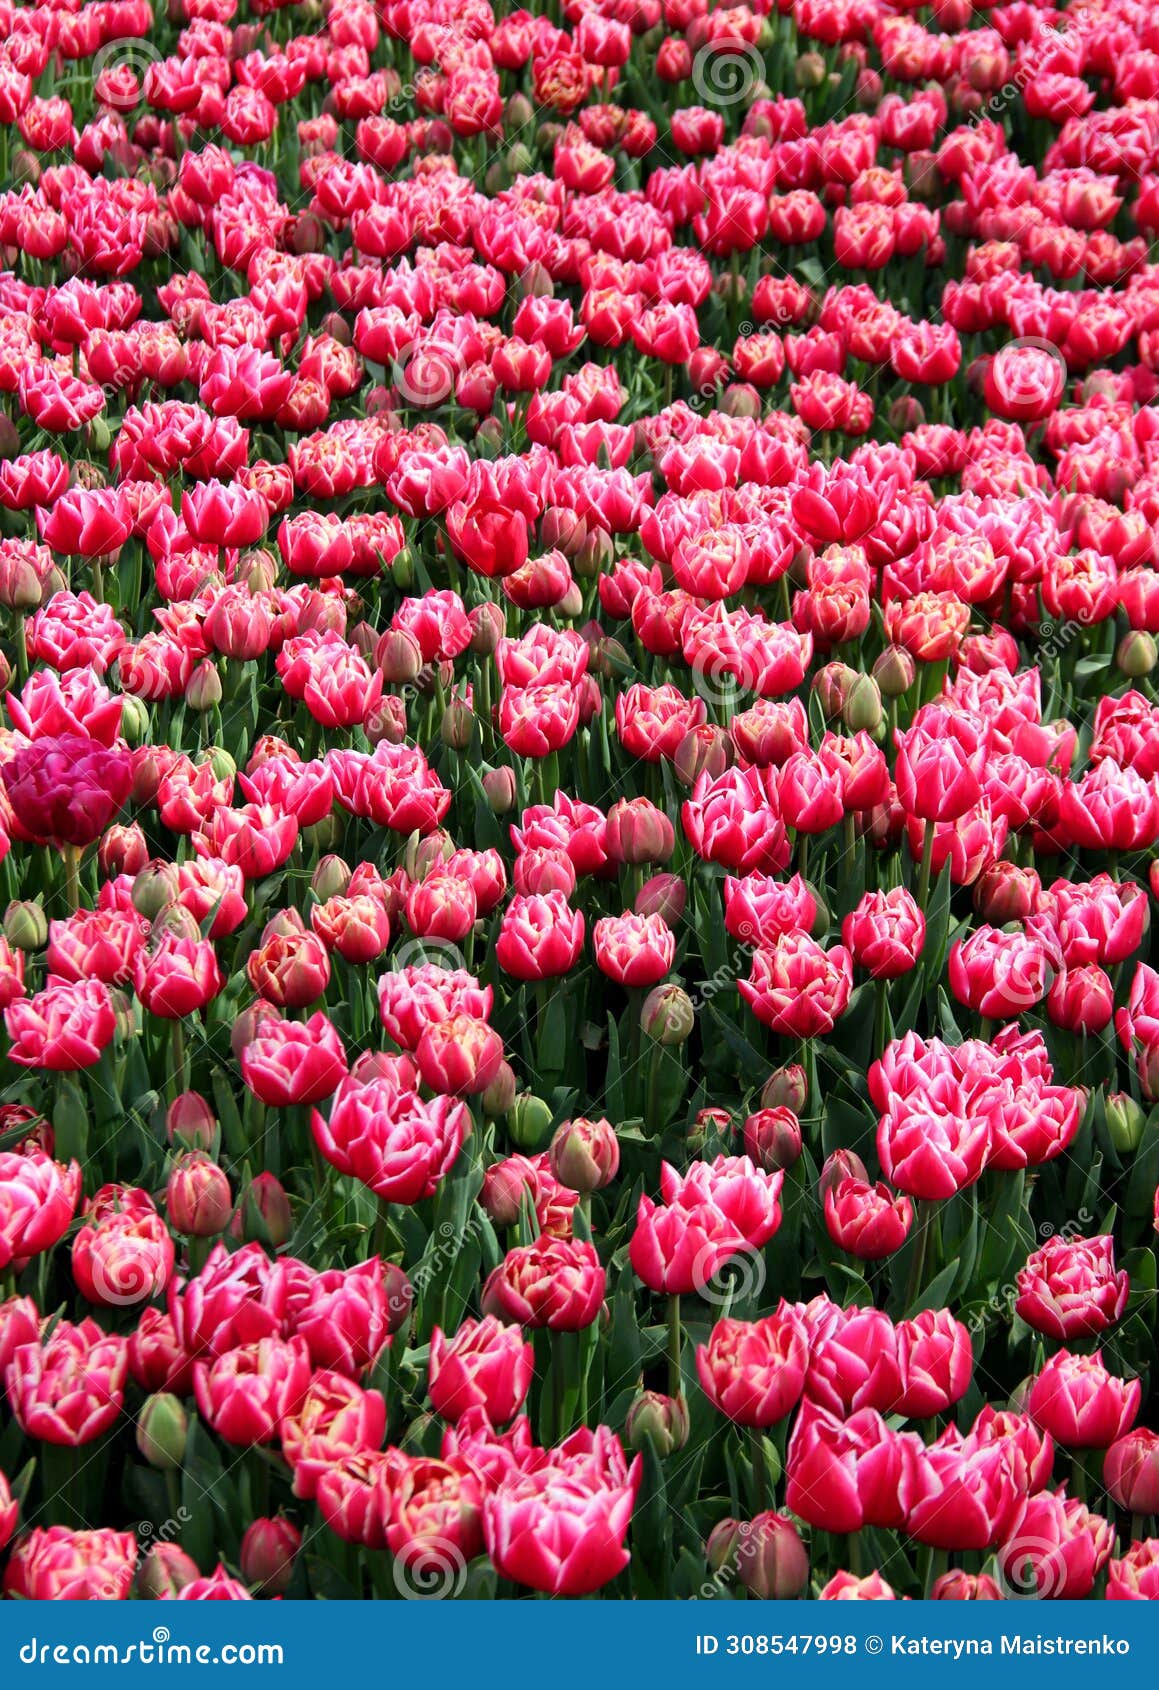 field of bright pink with white tulips in full bloom in goztepe park in istanbul, turkey